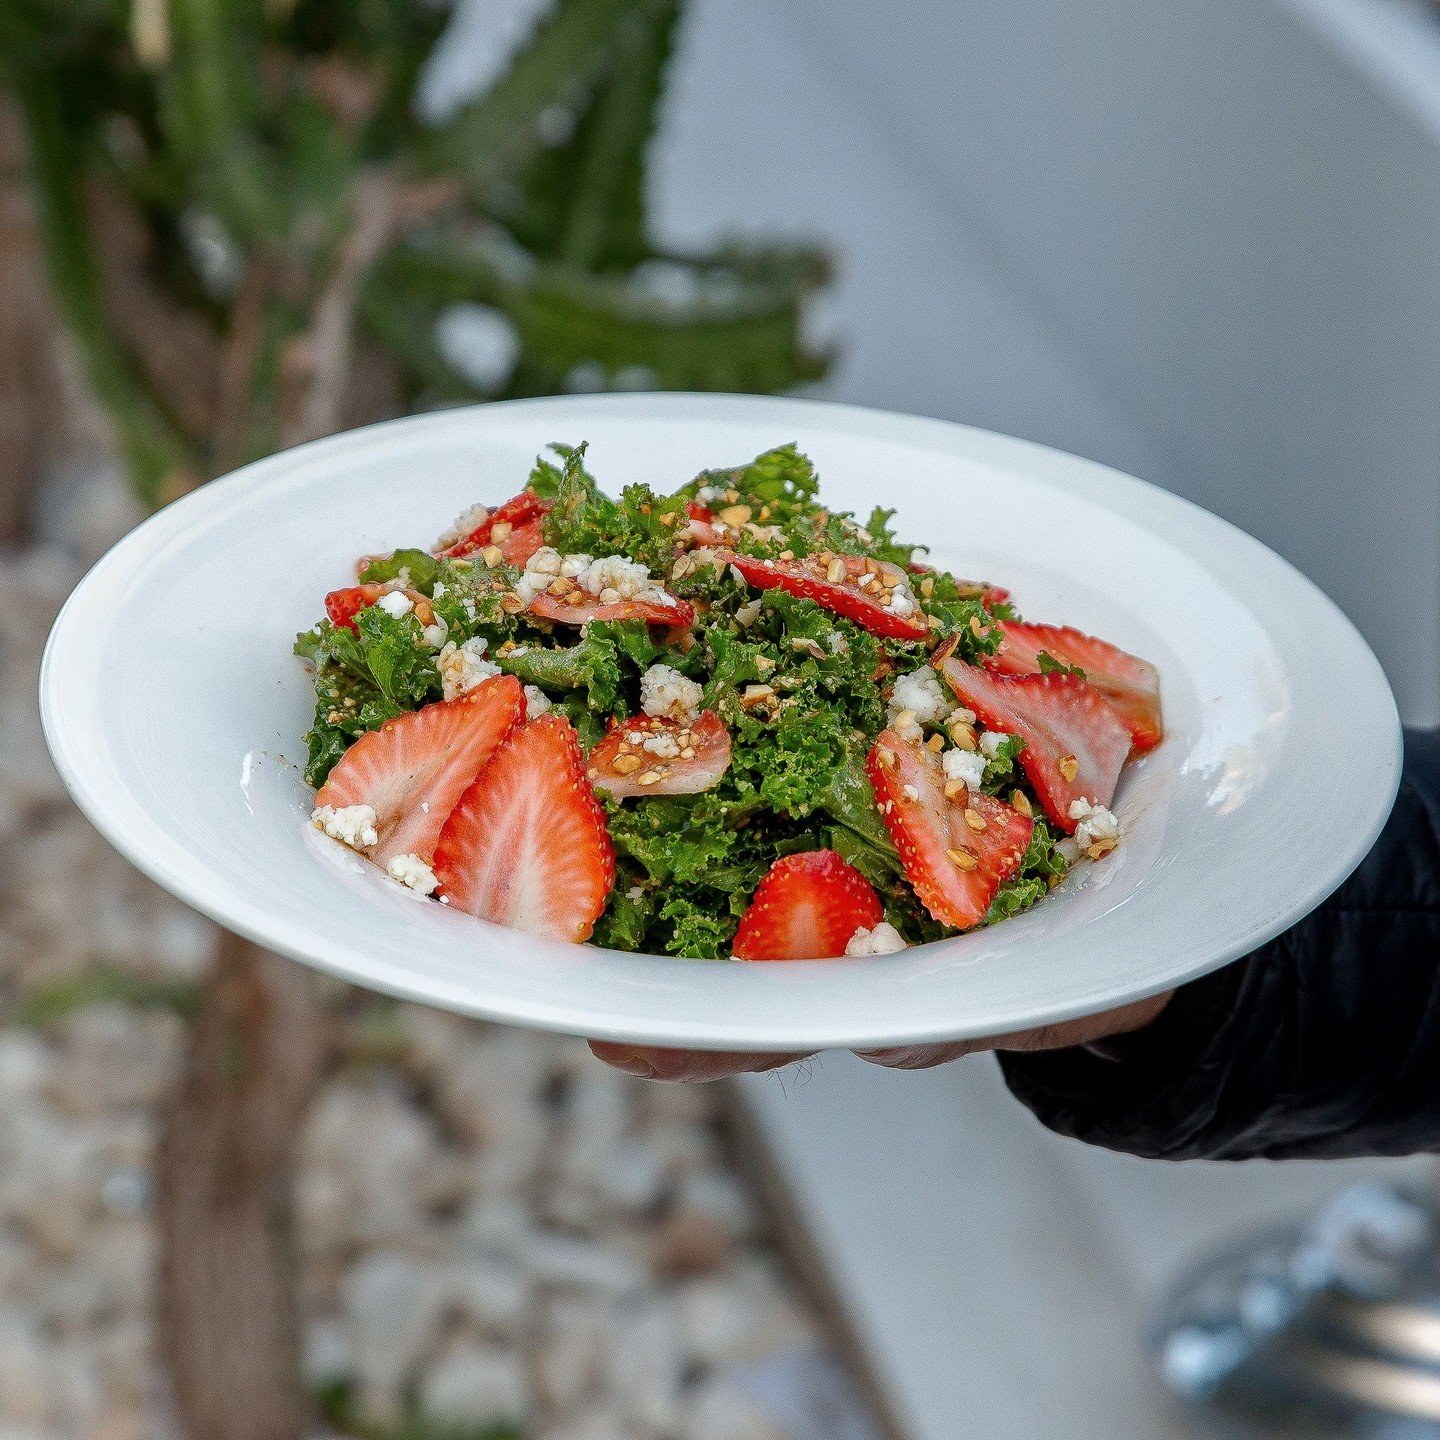 Perfect Spring flavors in this fresh and vibrant salad.

To reserve, tap the link in our bio

#Oliveto #EnhanceYourSenses #Italian #Restaurant #Bahrain #KSA #Khobar #Dammam #Kuwait #Lounge #Livemusic #Foodie